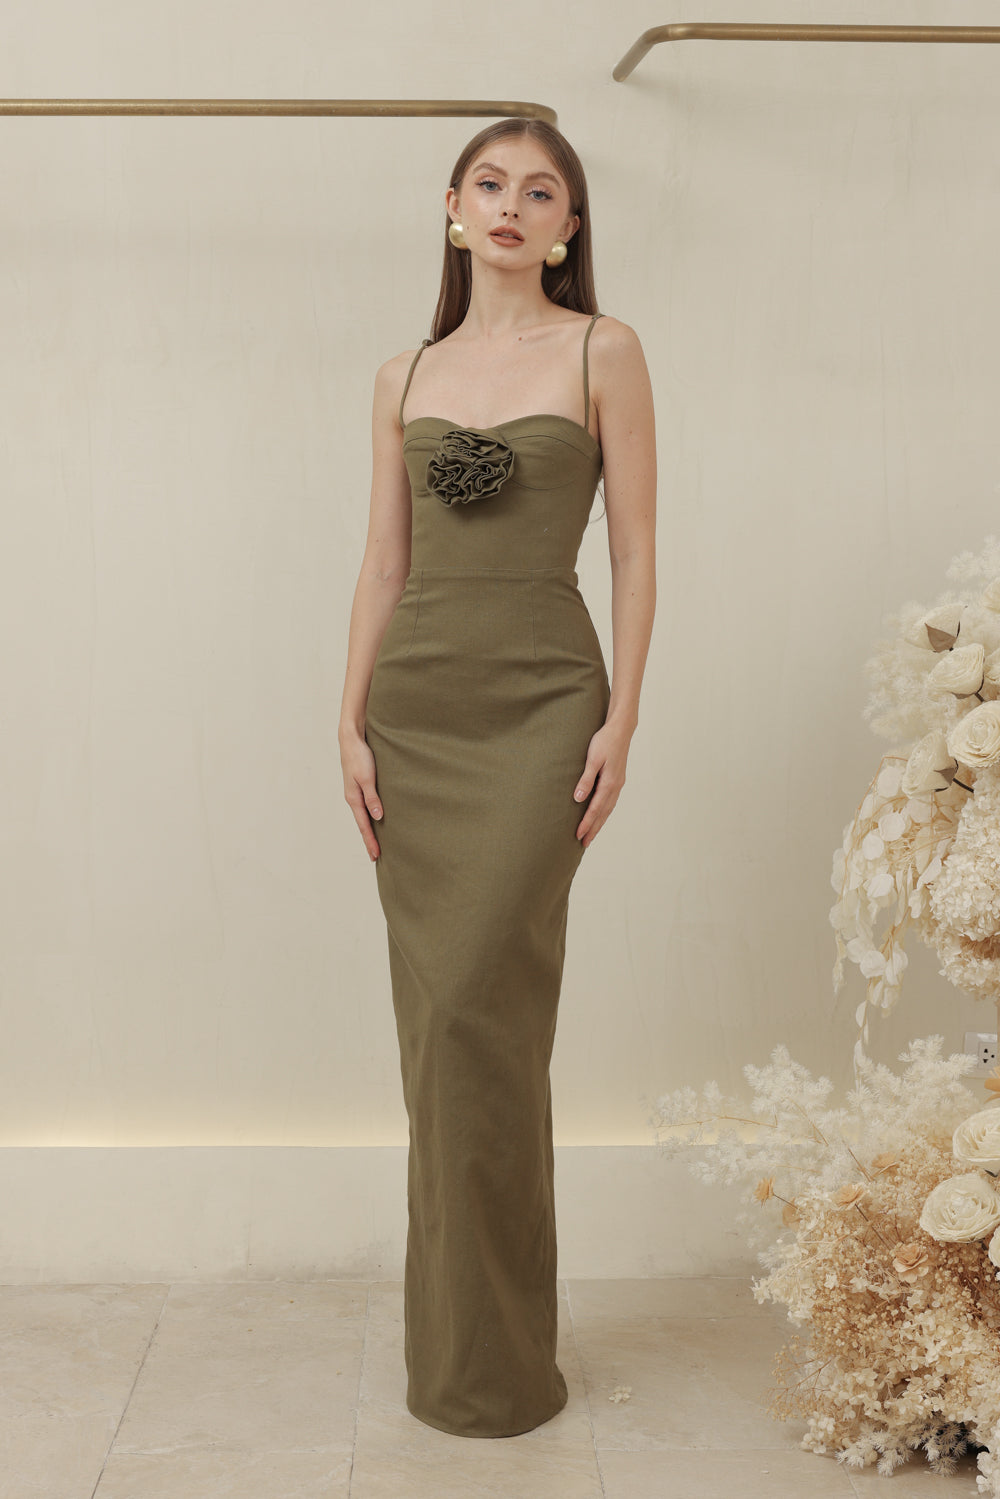 JULIETTE DRESS Strappy Pencil Skirt Maxi with Trio Floral Detail (Olive Linen)